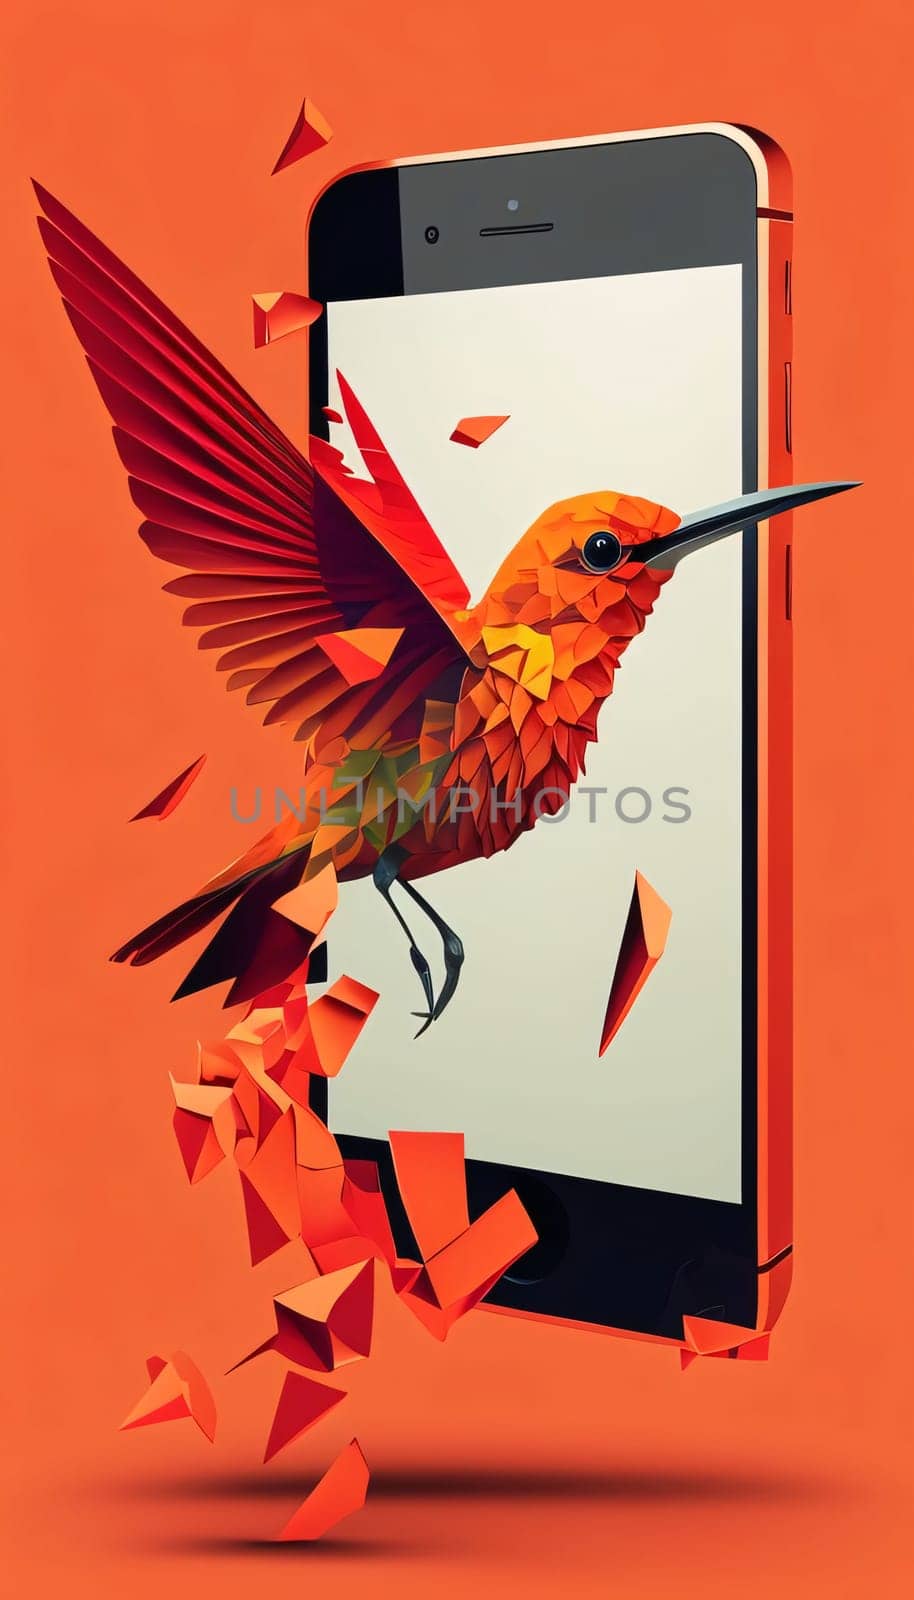 Smartphone screen: Smartphone with red bird origami on orange background. 3d illustration